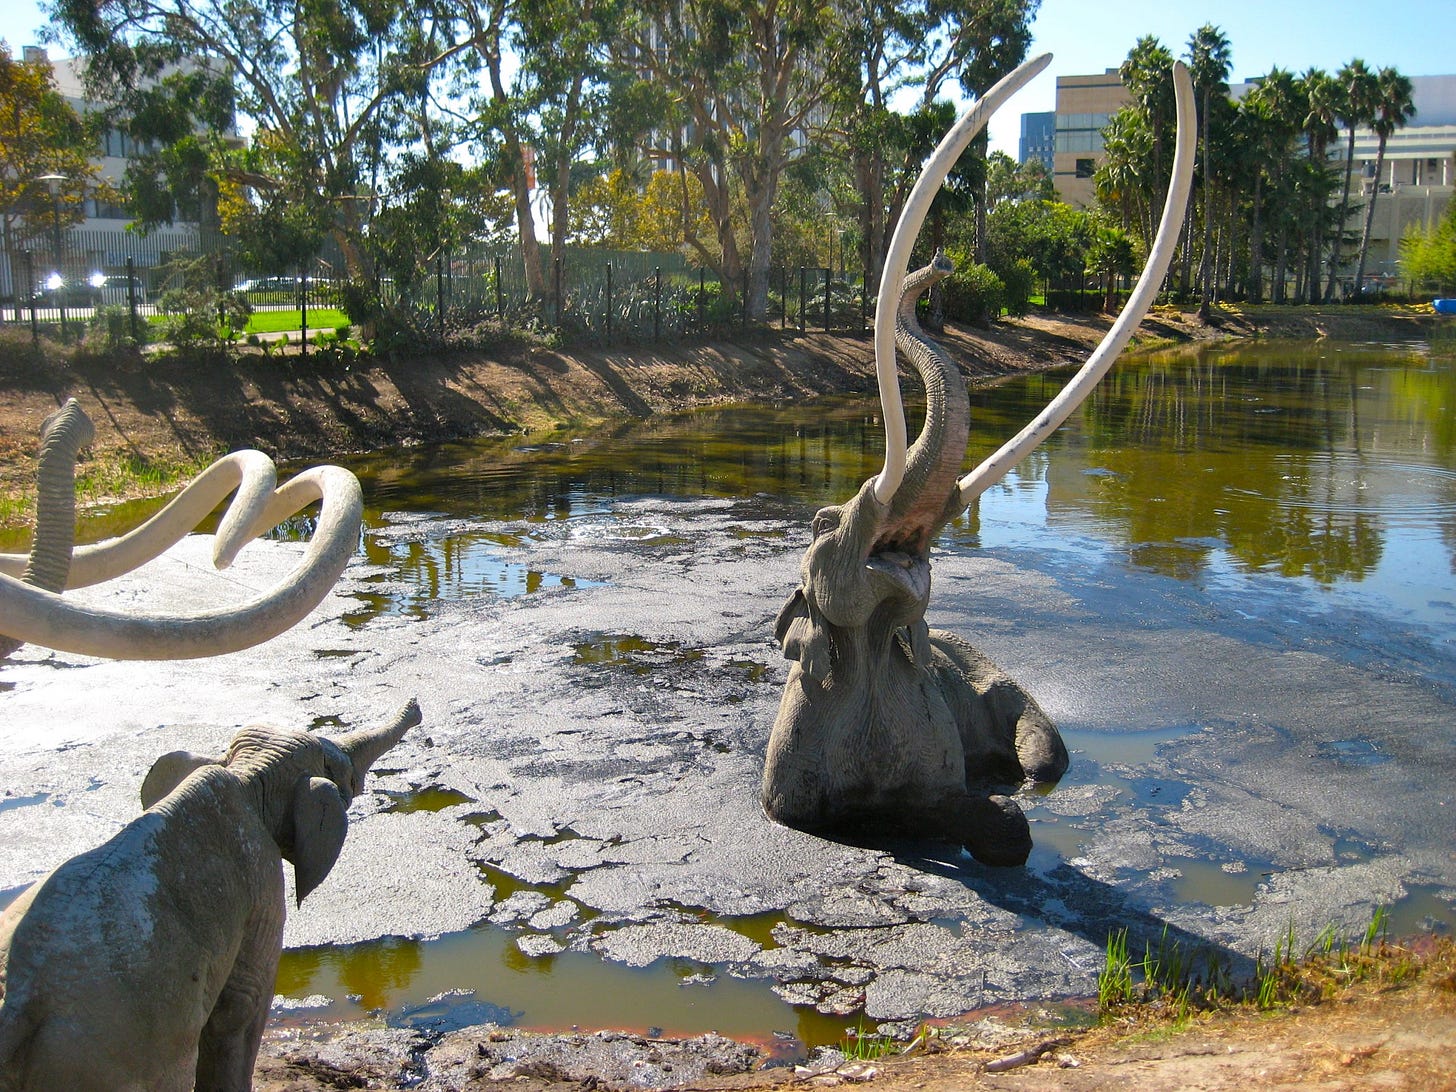 Deathstination: The LaBrea Tar Pits | The Order of the Good Death